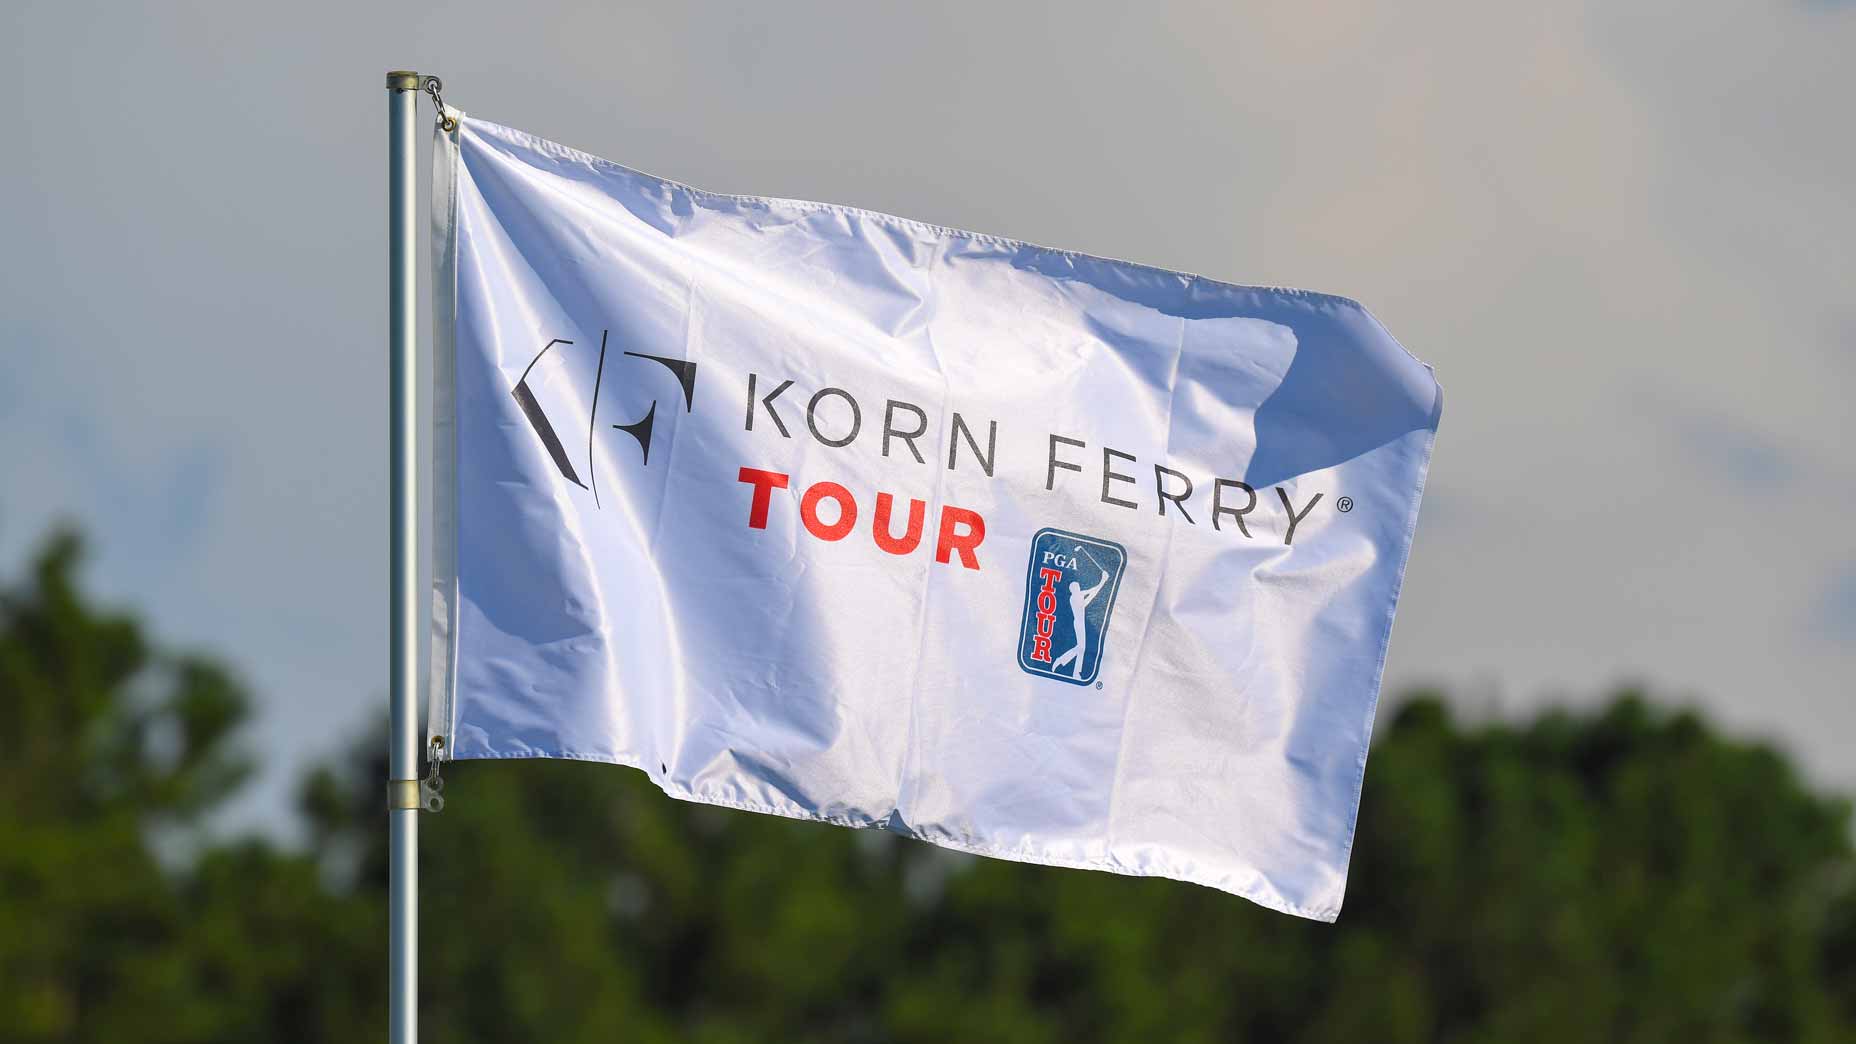 Korn Ferry Tour announces significant increase to purses over next 2 years